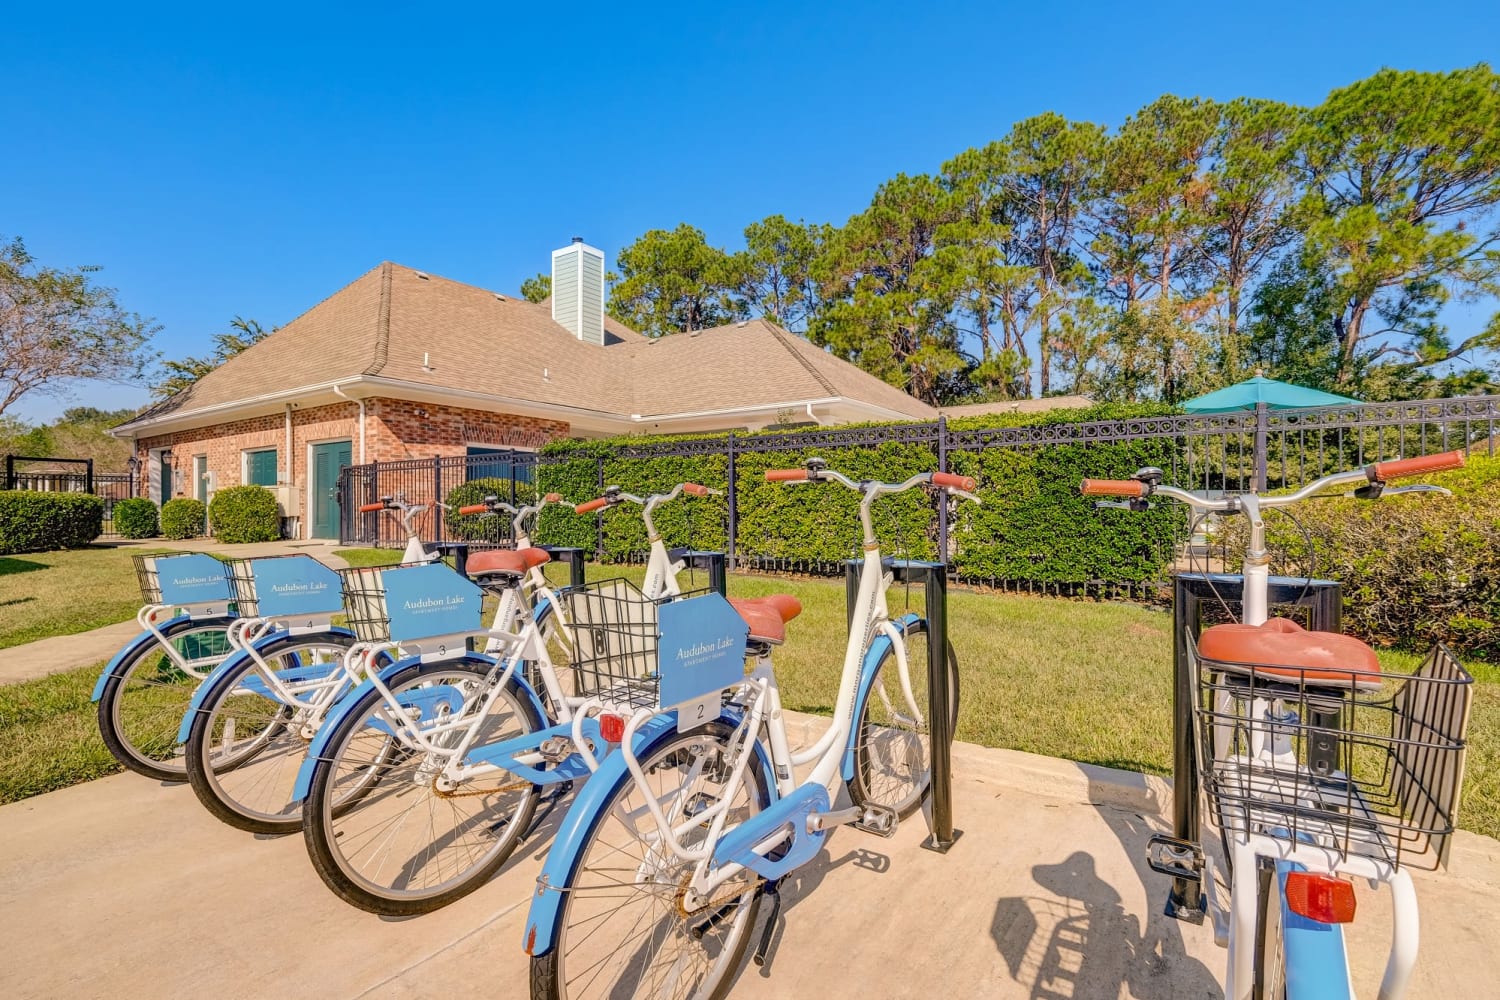 Shared bike station for residents at Audubon Apartments in Lafayette, LA